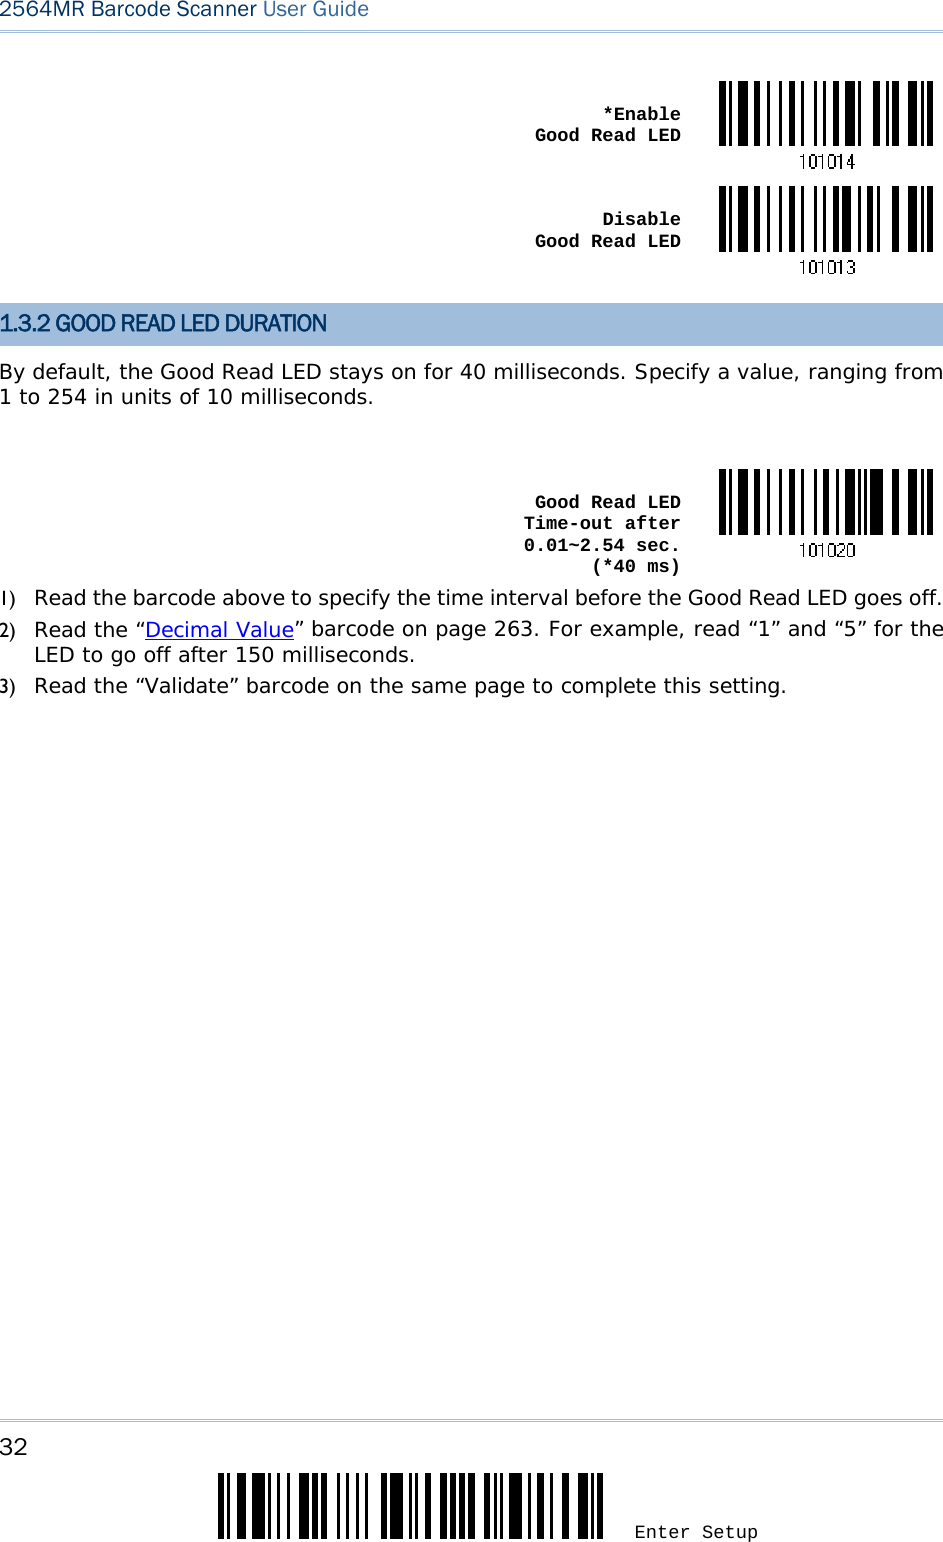 32 Enter Setup 2564MR Barcode Scanner User Guide   *Enable  Good Read LED Disable  Good Read LED 1.3.2 GOOD READ LED DURATION By default, the Good Read LED stays on for 40 milliseconds. Specify a value, ranging from 1 to 254 in units of 10 milliseconds.   Good Read LED Time-out after 0.01~2.54 sec.  (*40 ms)1) Read the barcode above to specify the time interval before the Good Read LED goes off. 2) Read the “Decimal Value” barcode on page 263. For example, read “1” and “5” for the LED to go off after 150 milliseconds.  3) Read the “Validate” barcode on the same page to complete this setting.  